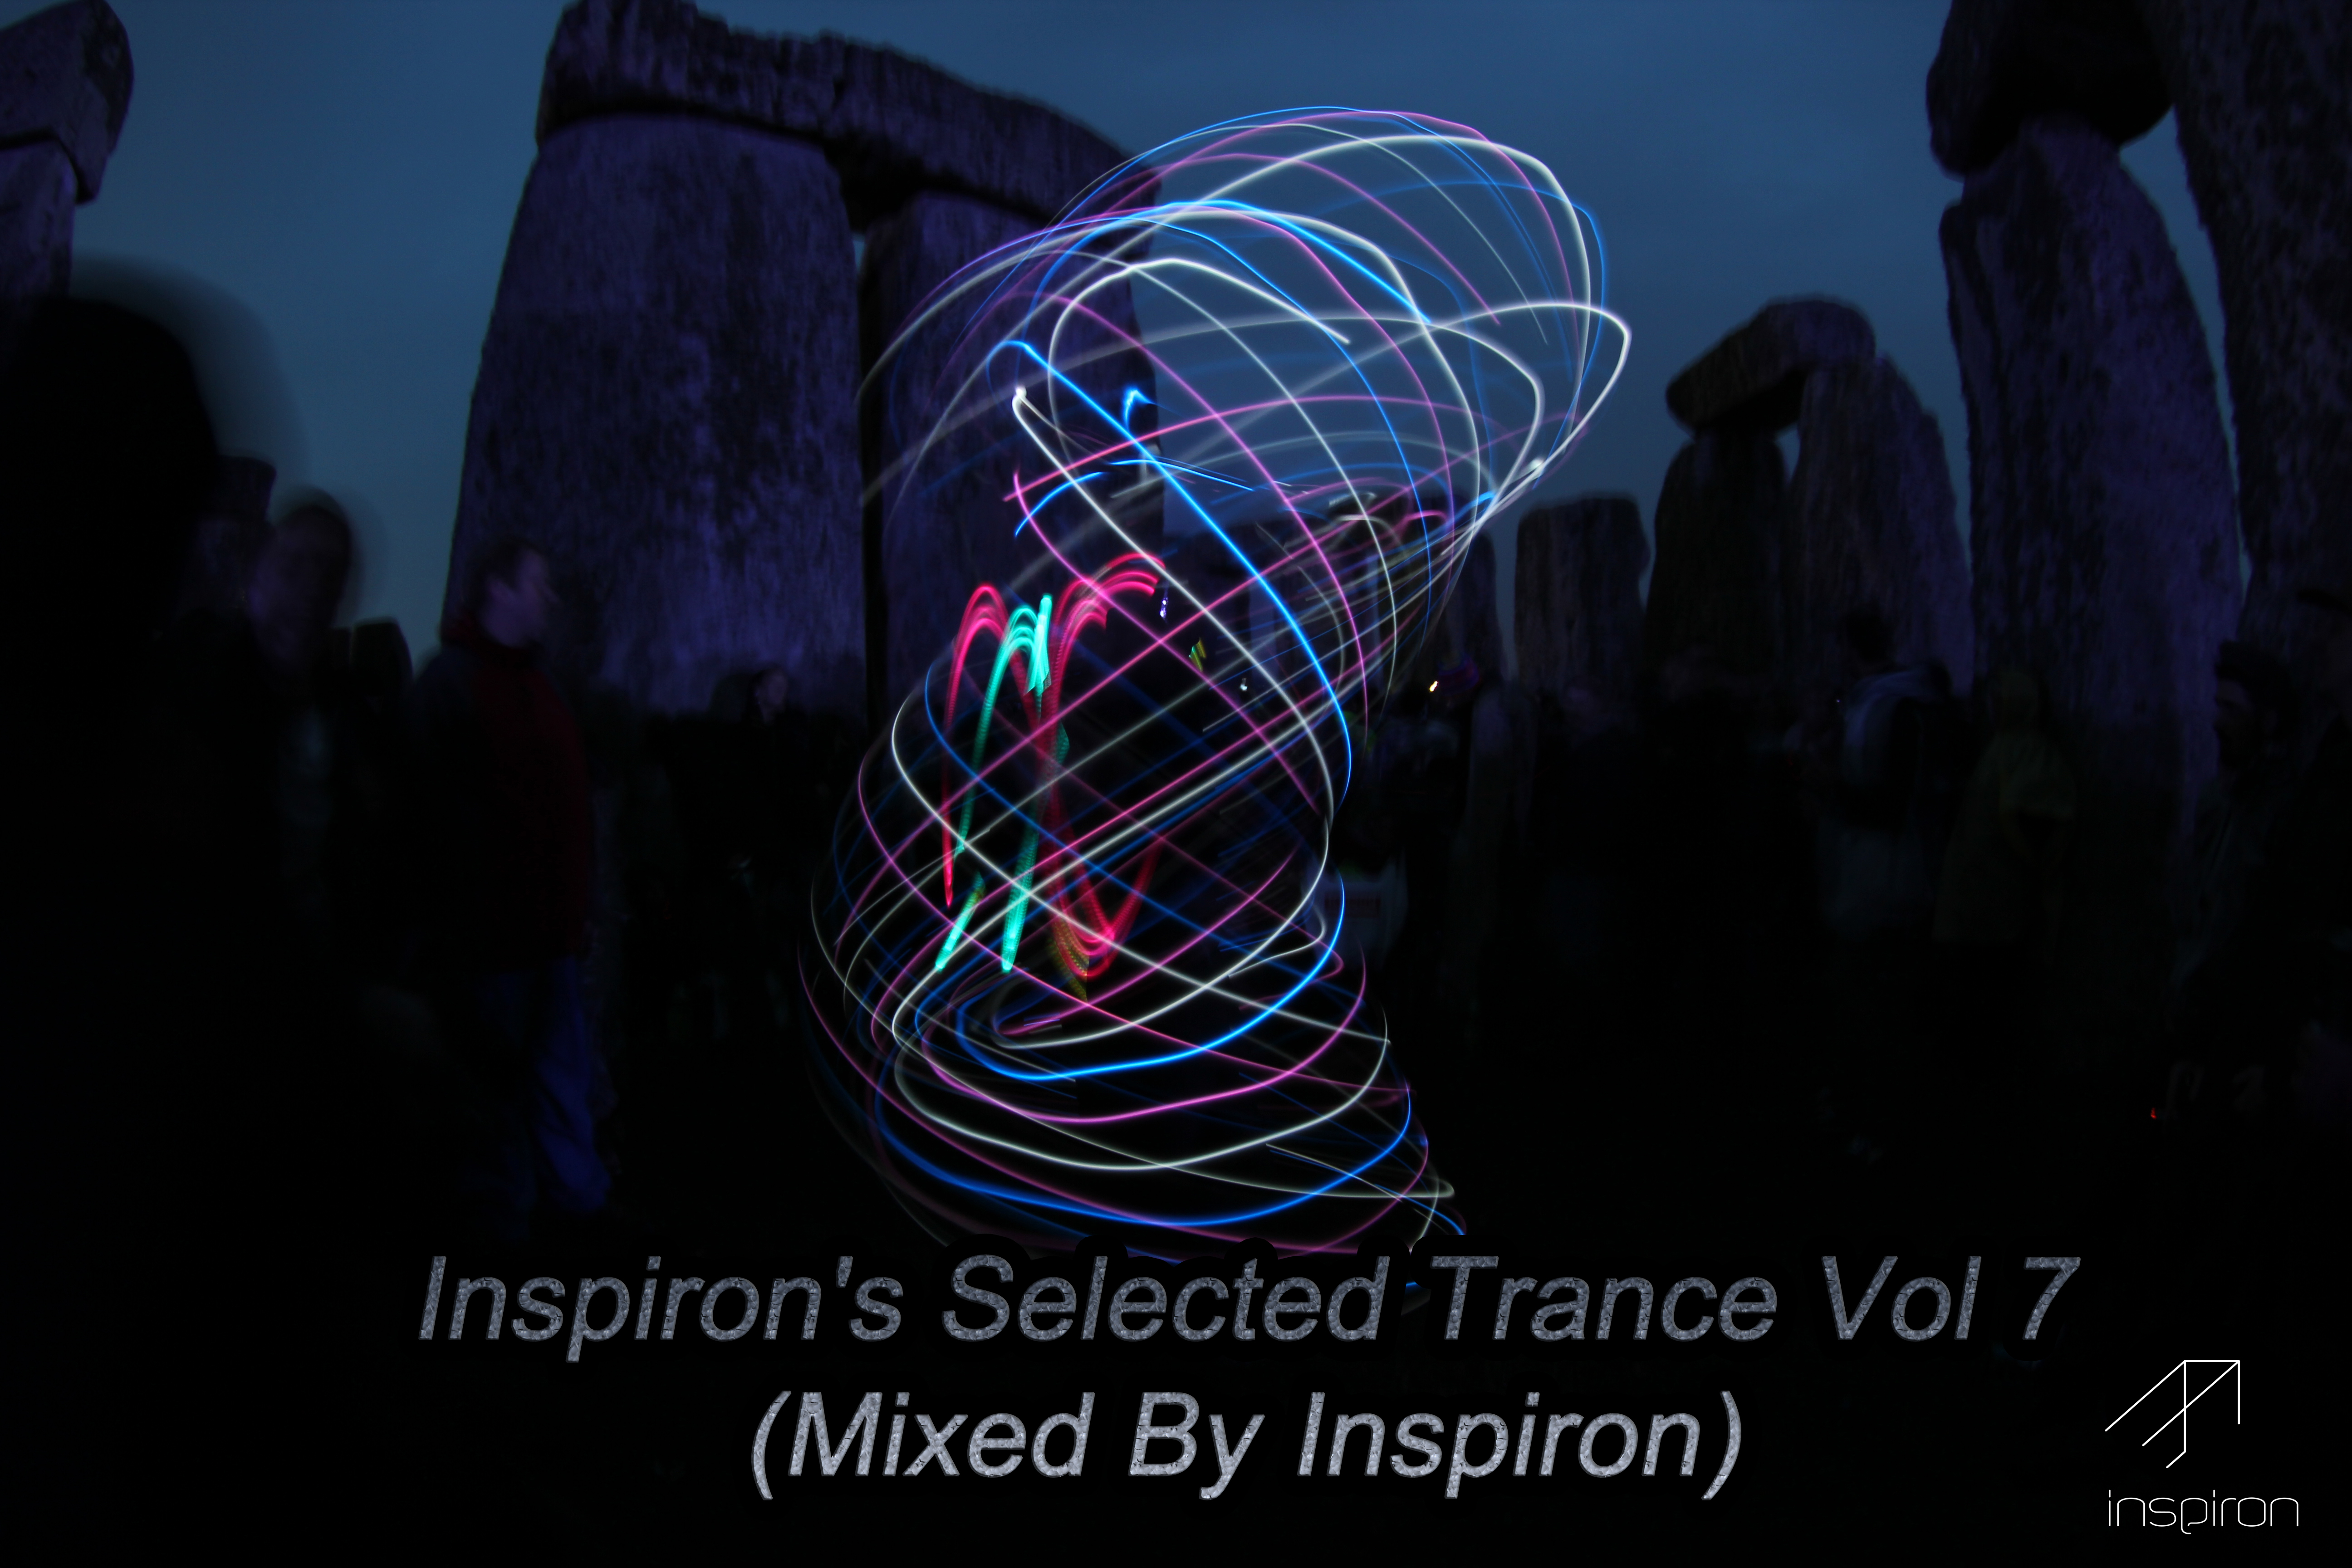 Inspirons Selected Trance Vol 7 Mixed By Inspiron - Cover.jpg